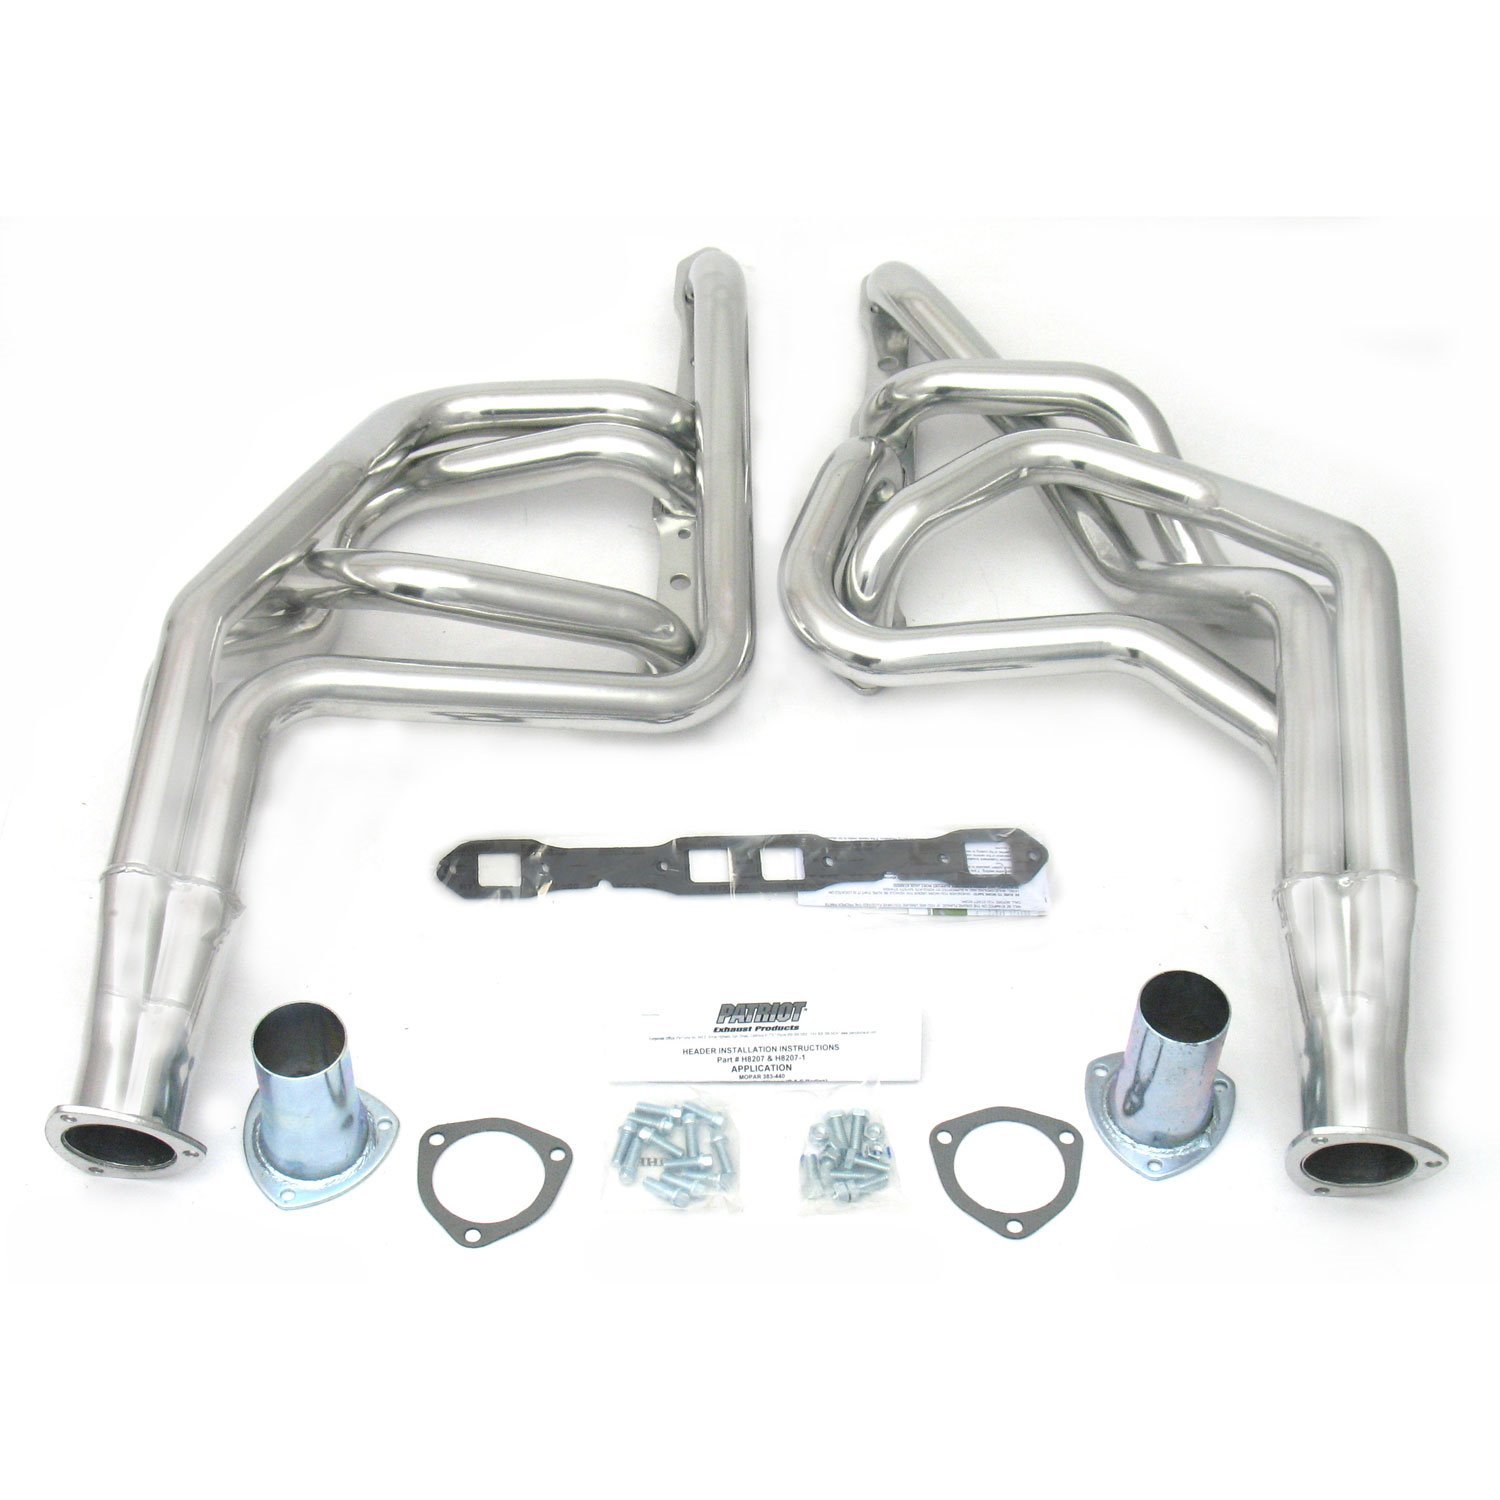 Dodge/Plymouth Specific Fit Headers 1967-74 B & E Bodies